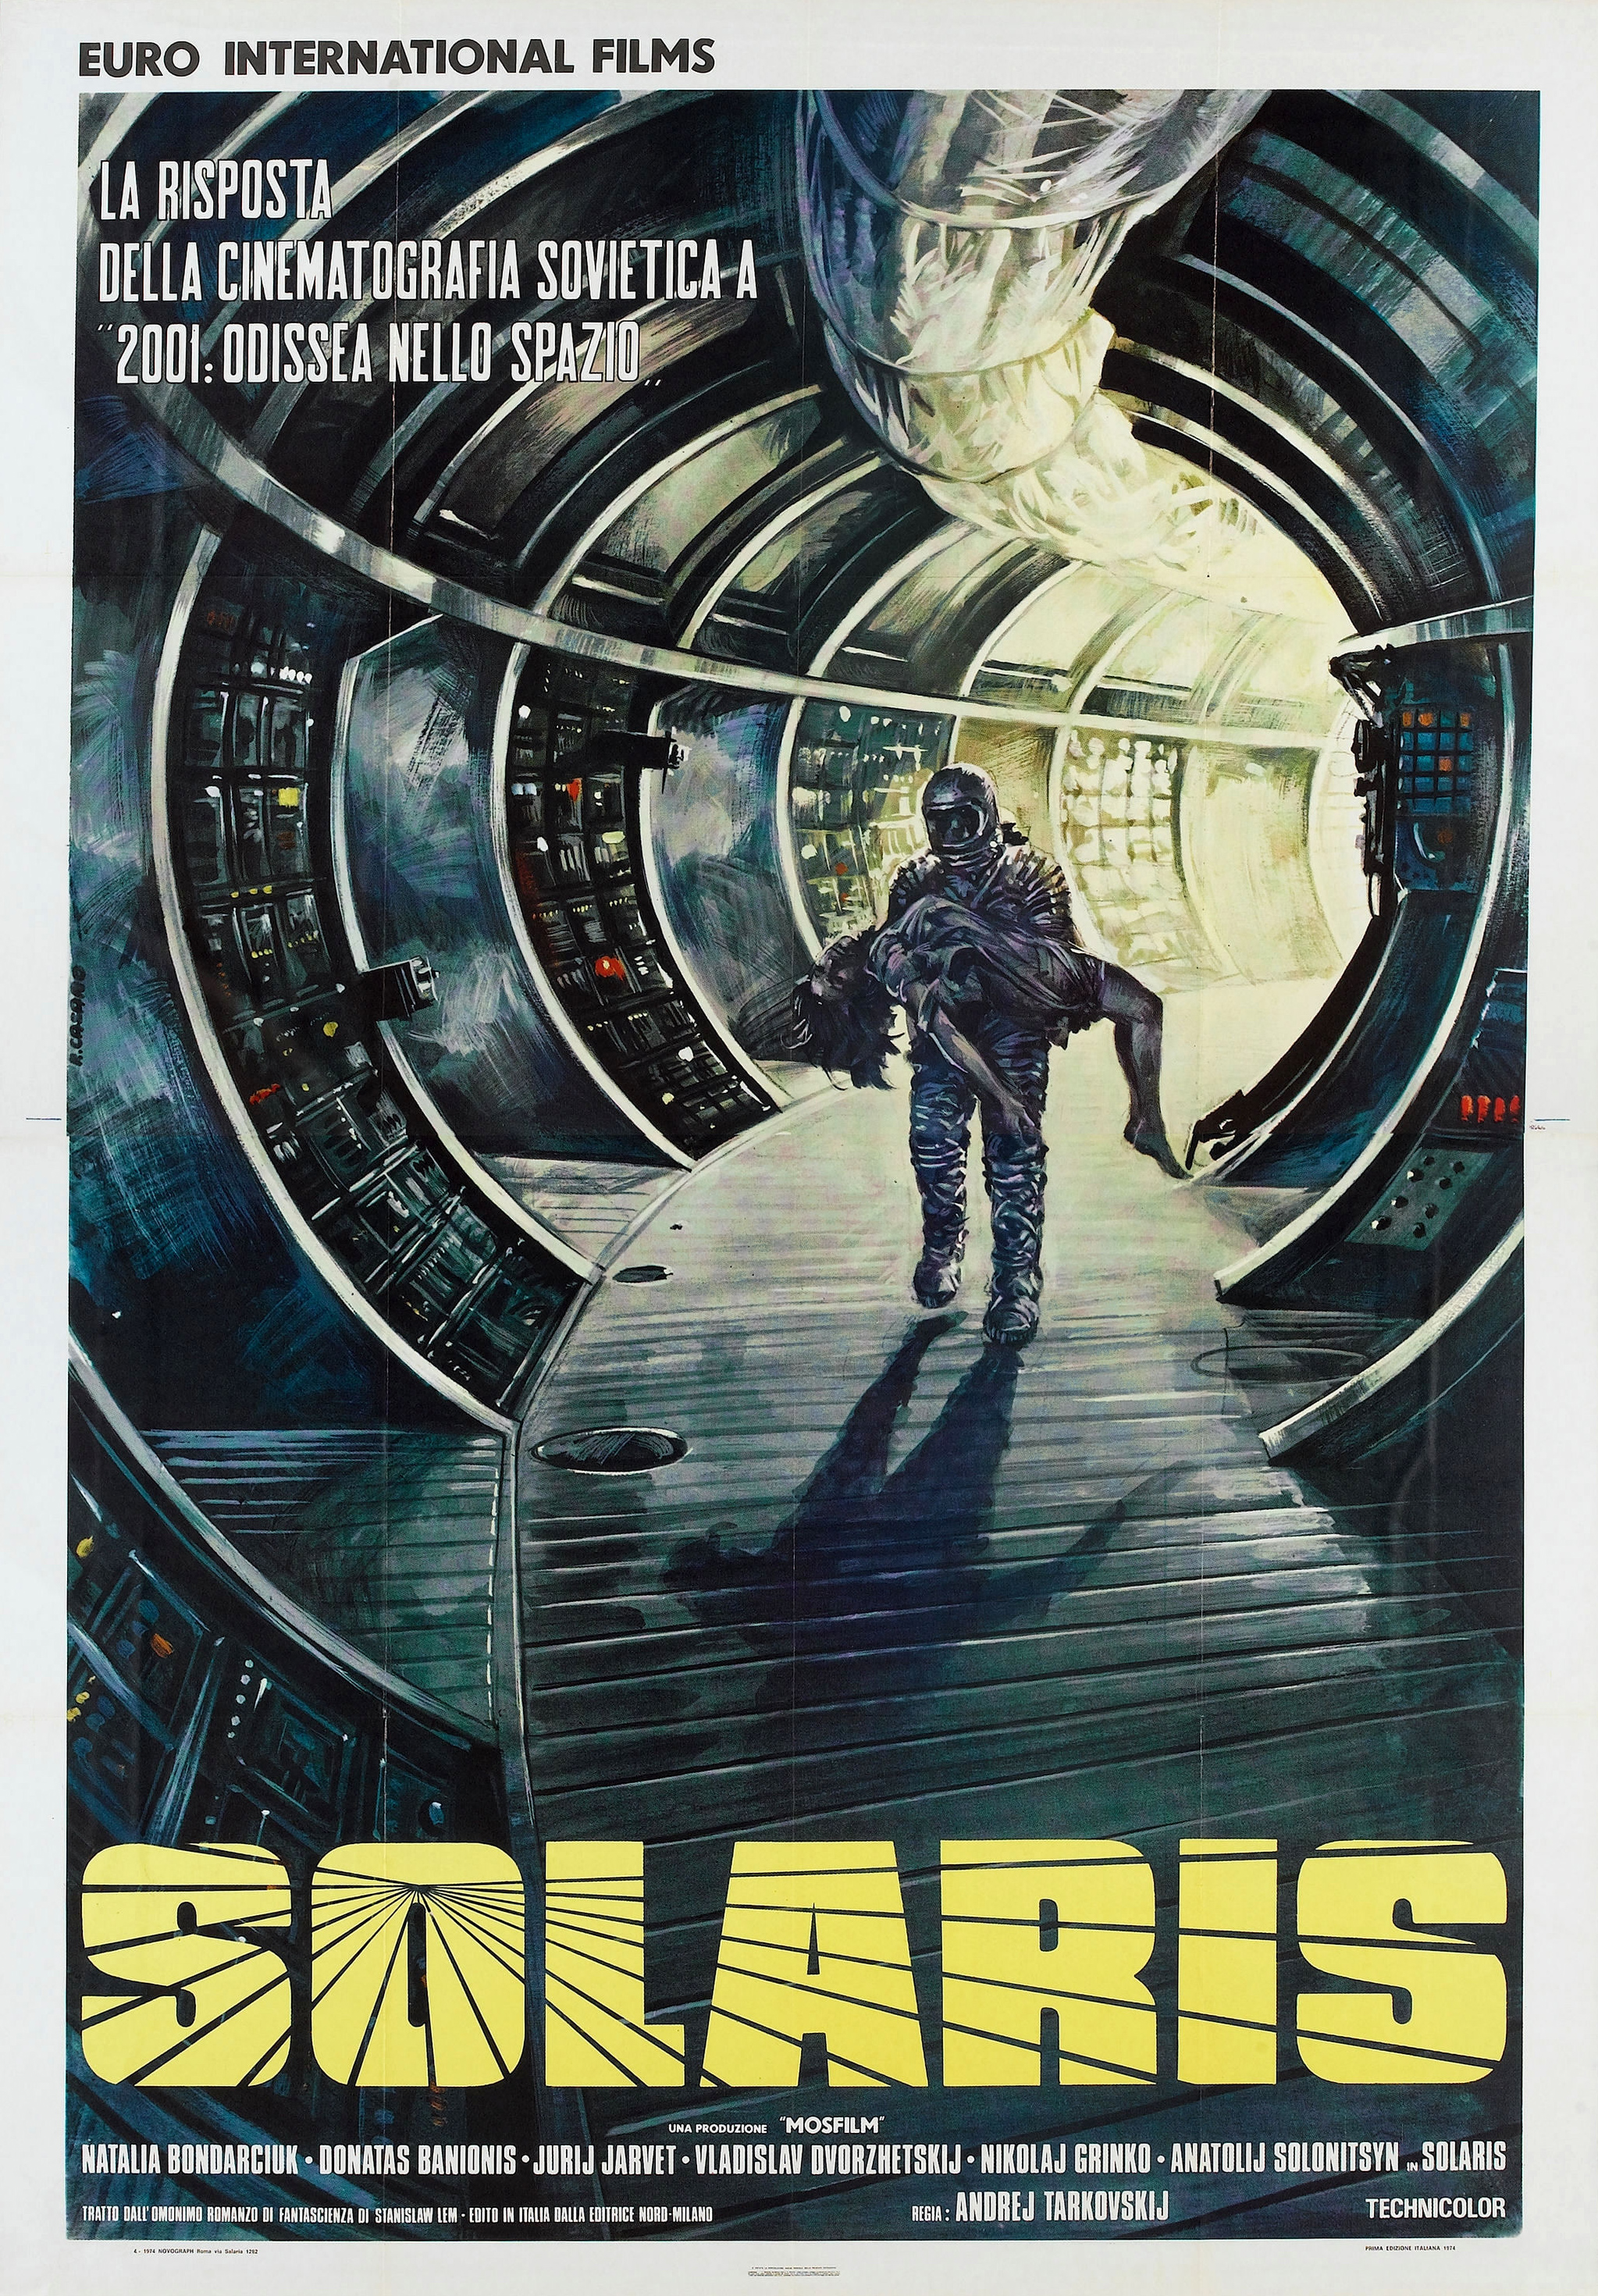 What Stanisław Lem’s novel “Solaris” would be like if other famous sci-fi and fantasy authors had written it